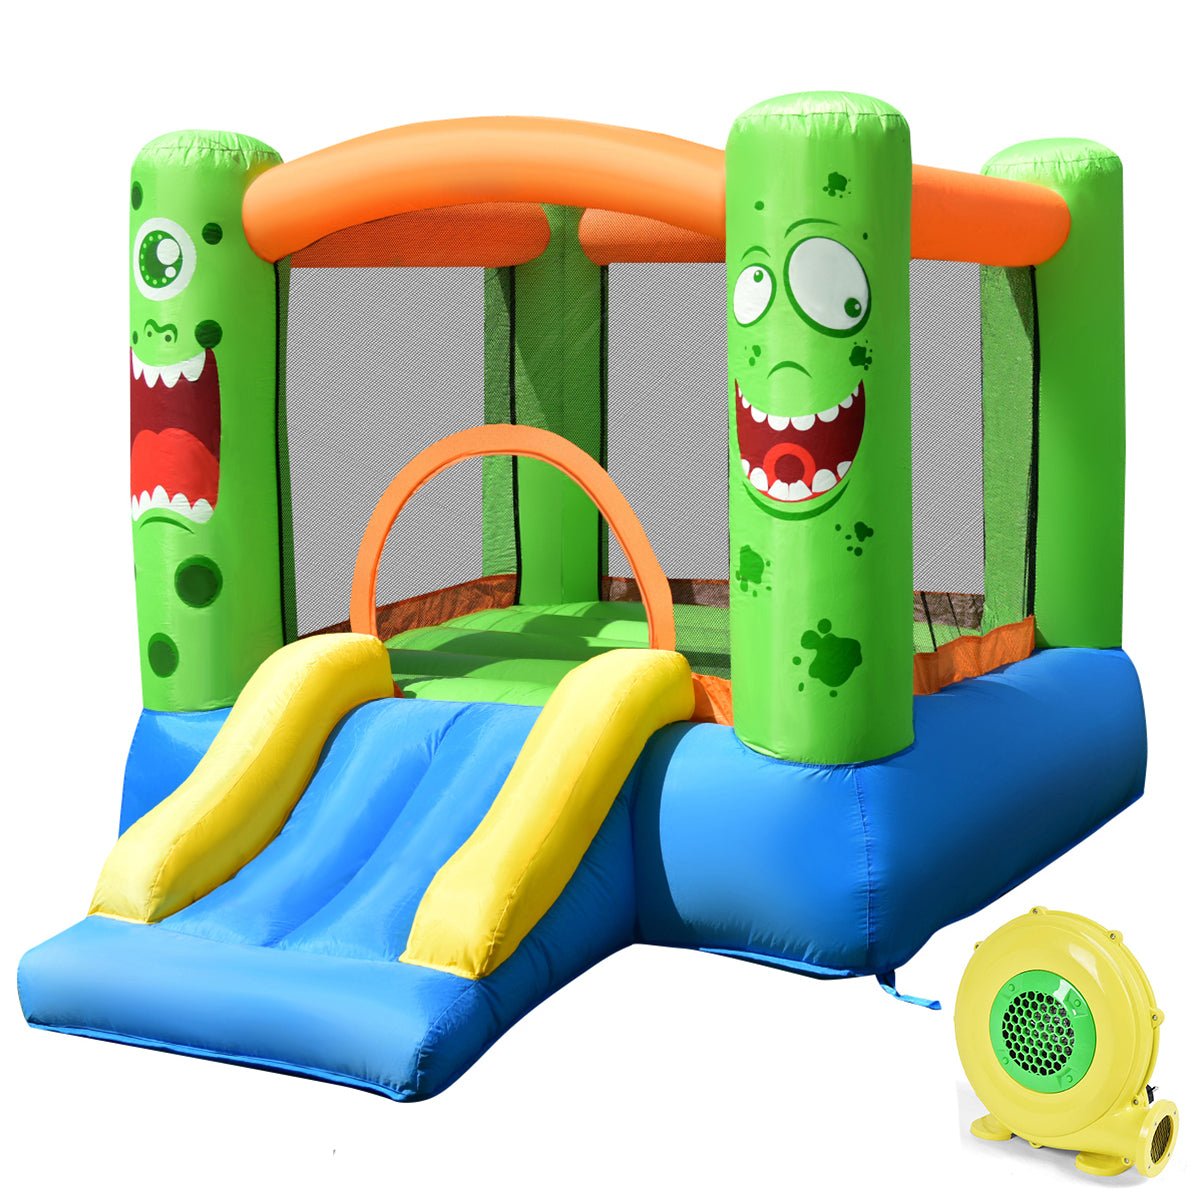 Inflatable Bounce Playhouse with Slide & Basketball Rim - Complete Fun Package